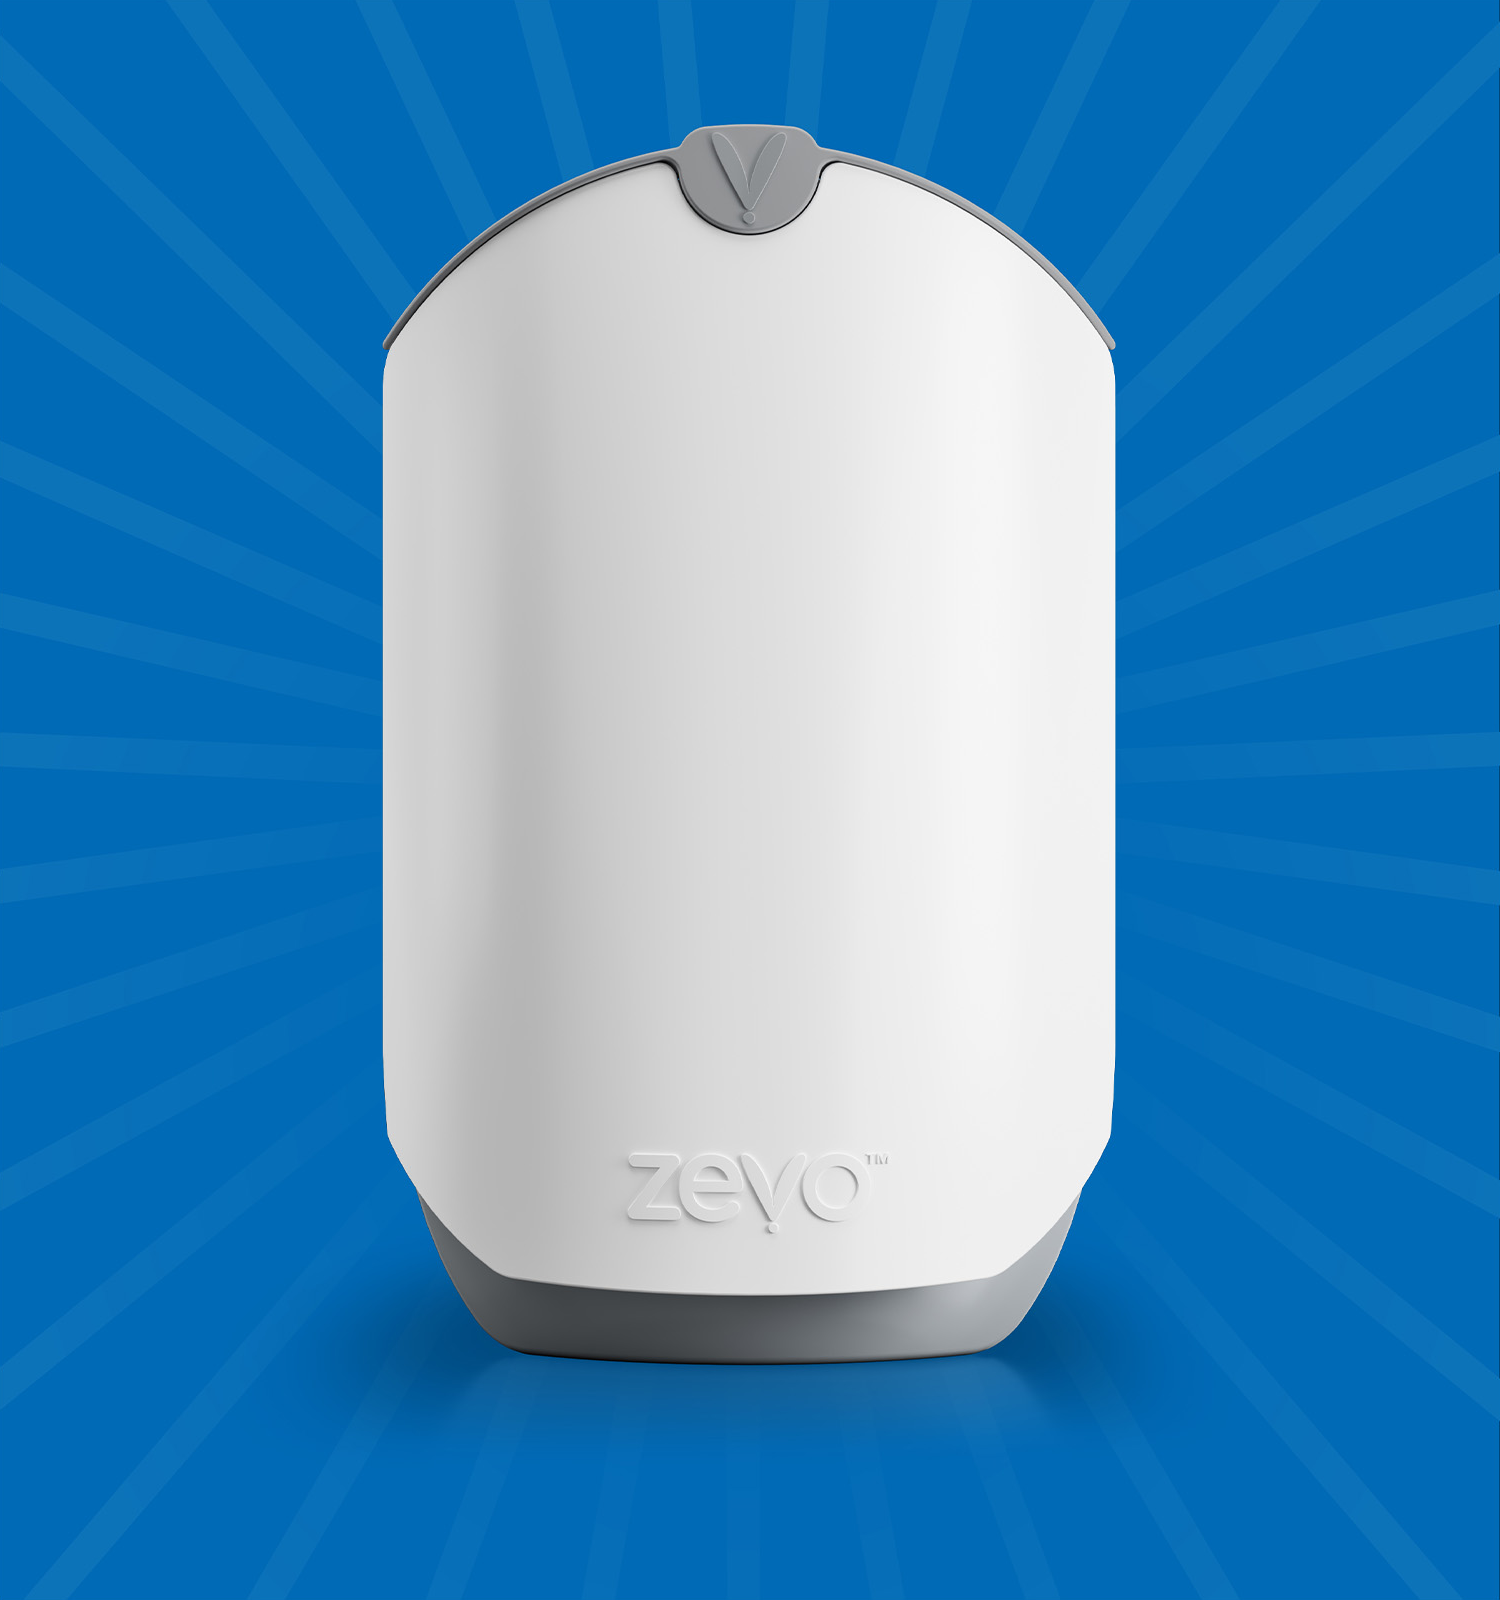 Render of the final design of the Zevo wall plug-in